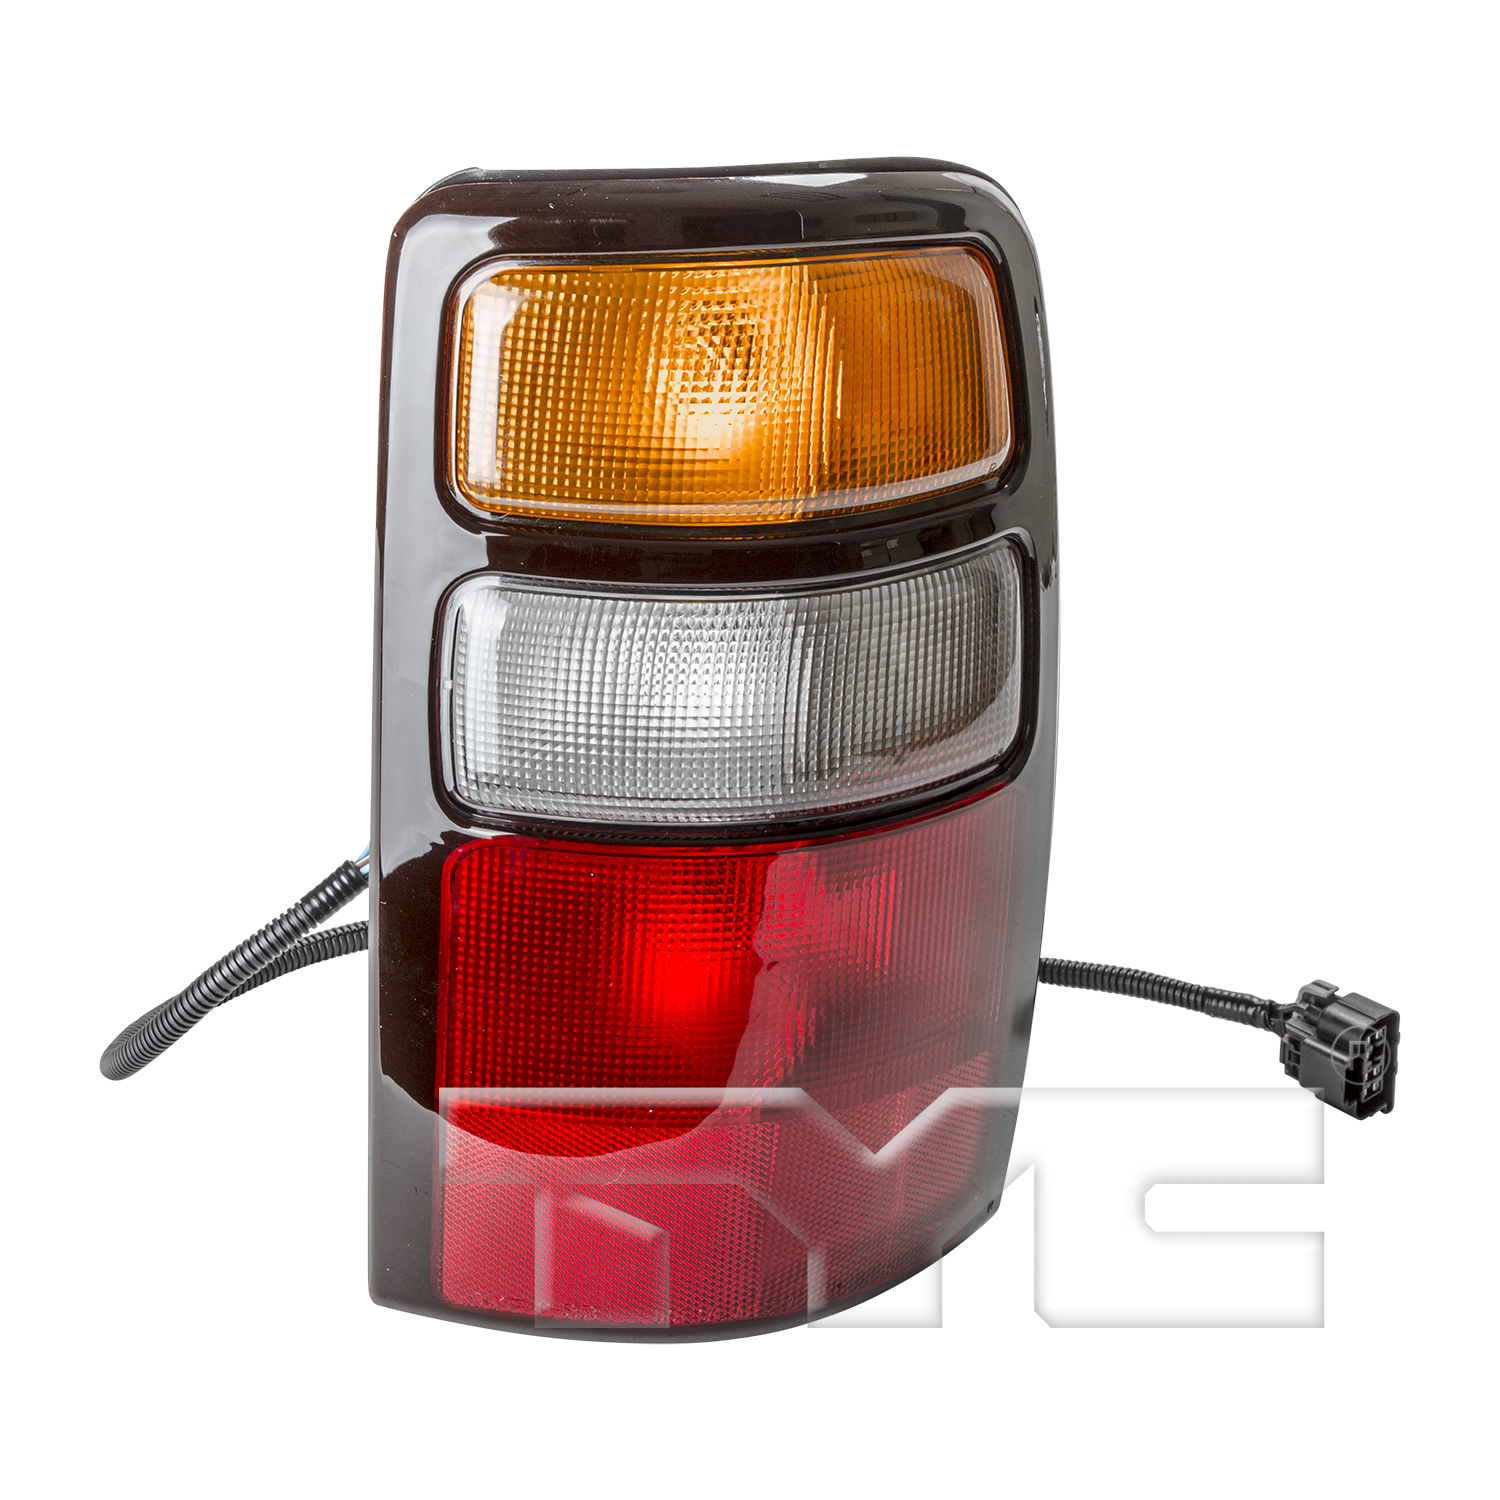 Aftermarket TAILLIGHTS for CHEVROLET - SUBURBAN 2500, SUBURBAN 2500,04-06,RT Taillamp assy